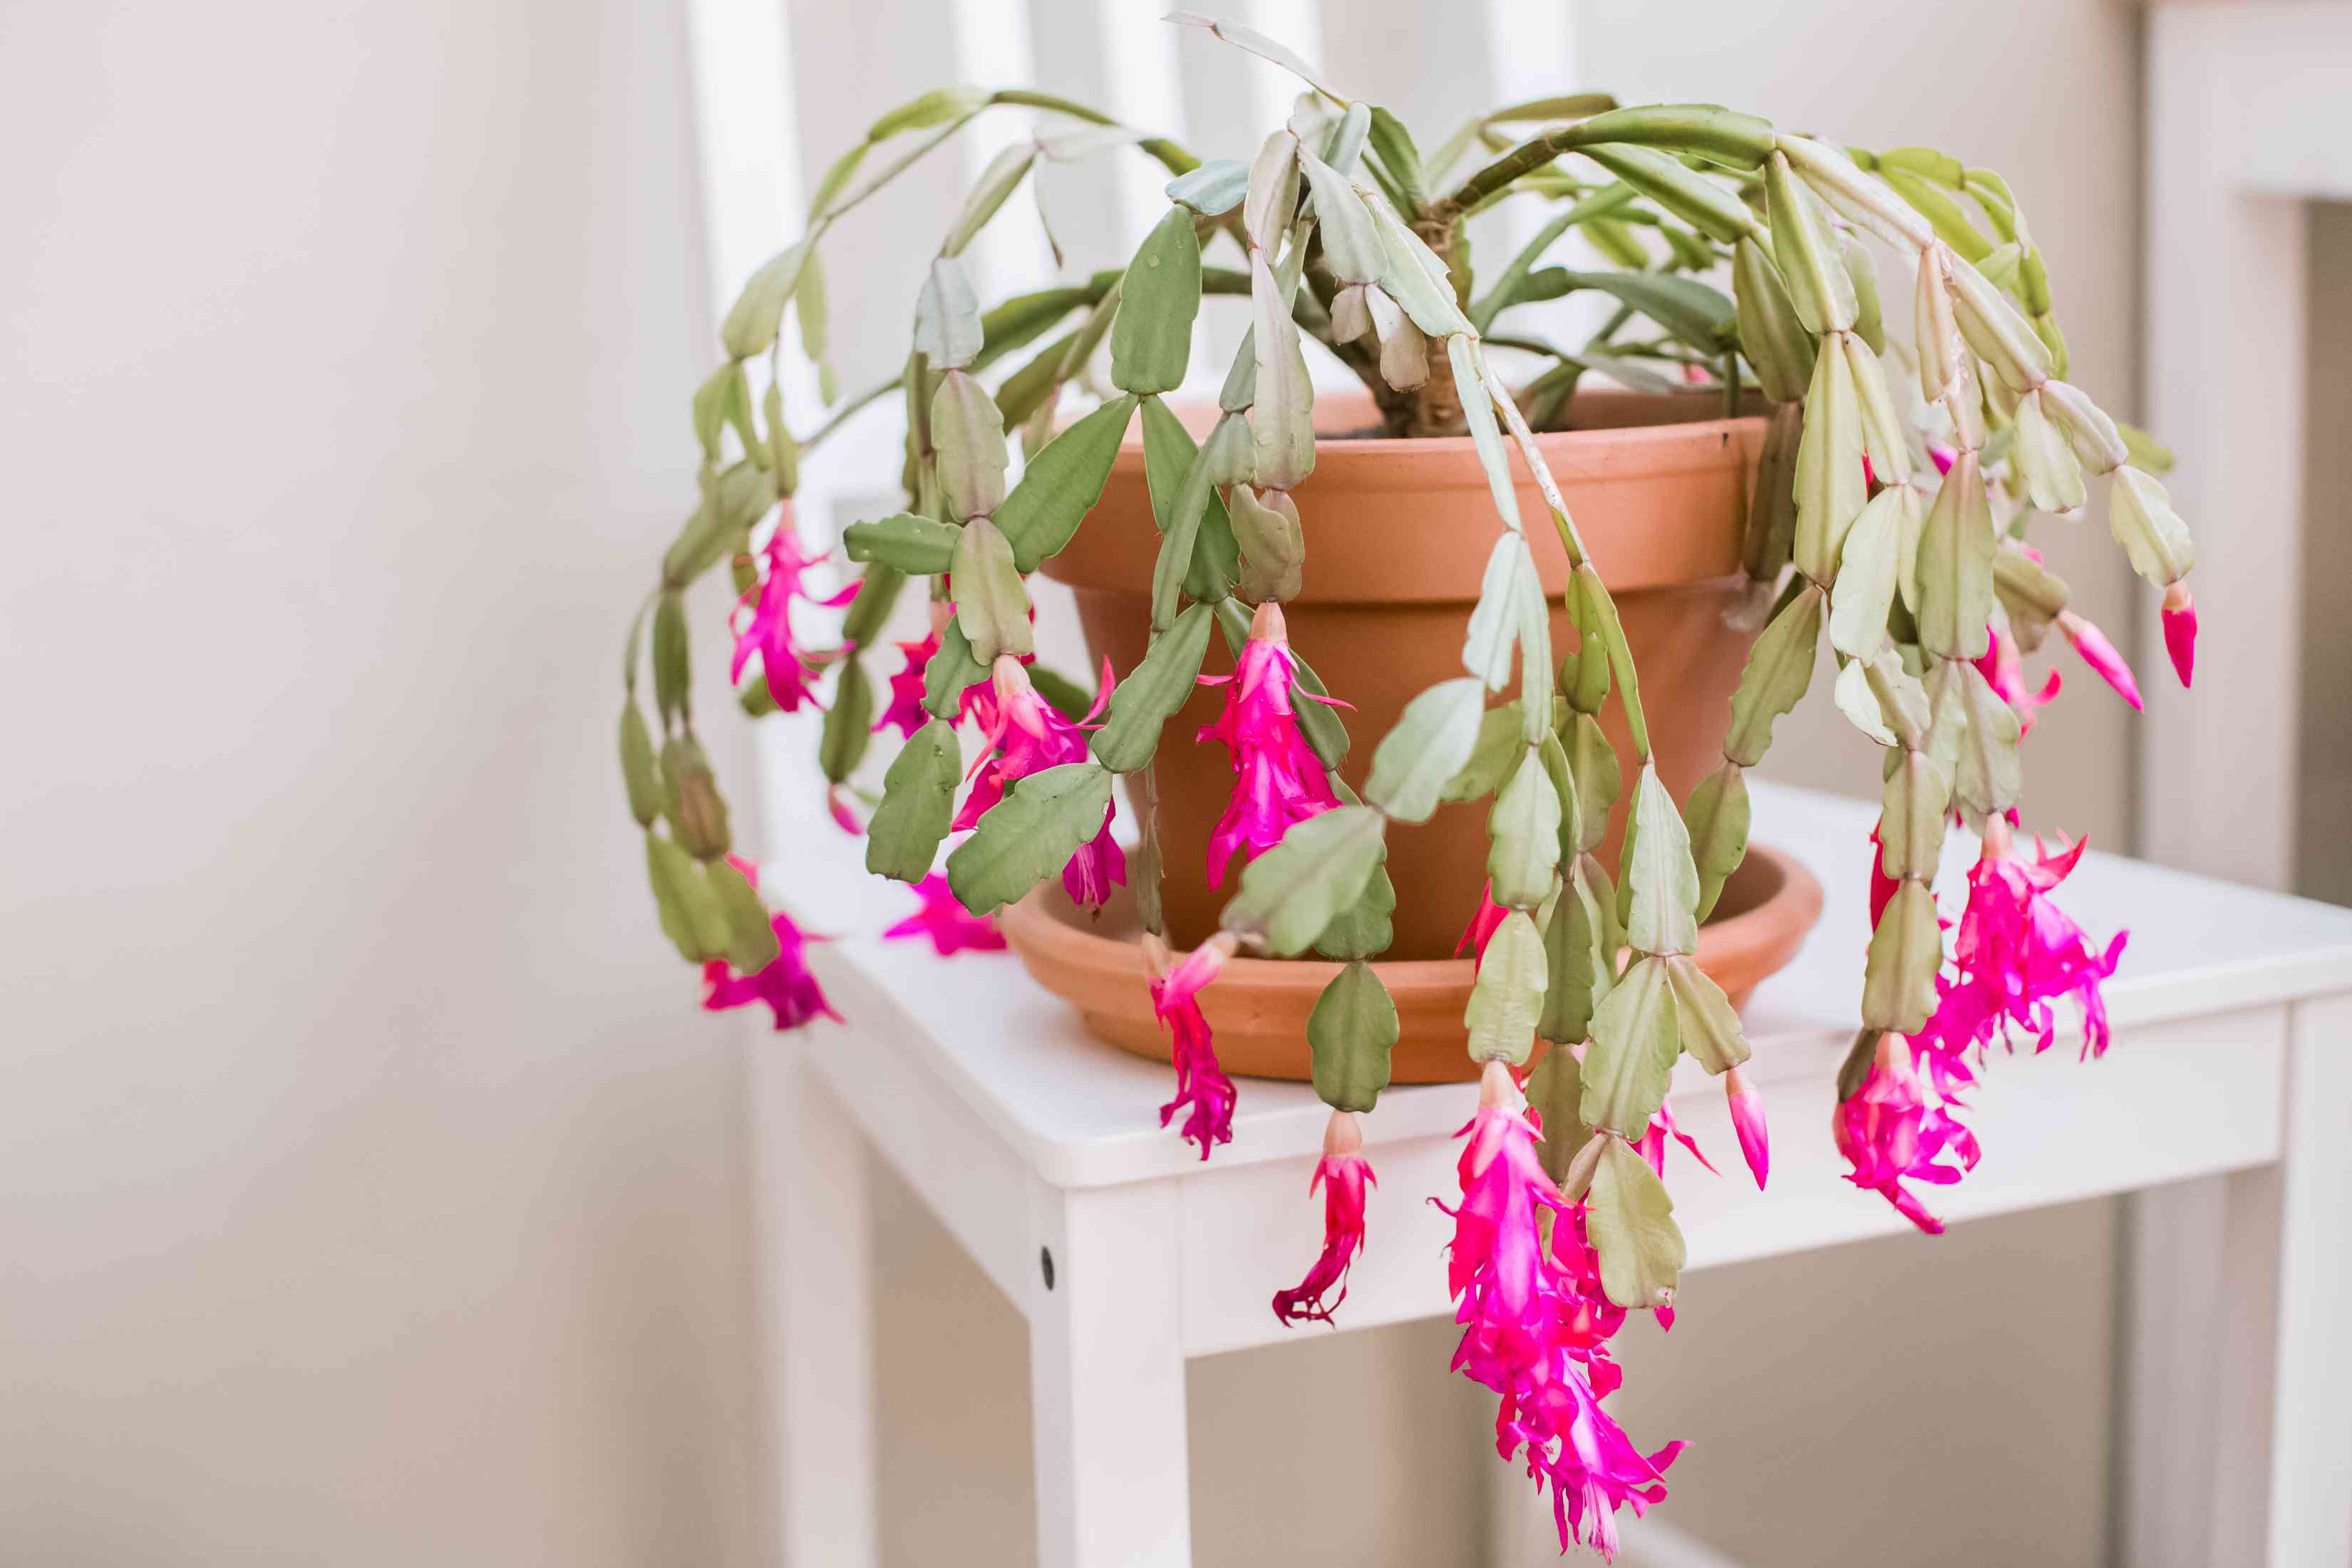 How to grow and care for Christmas cactus